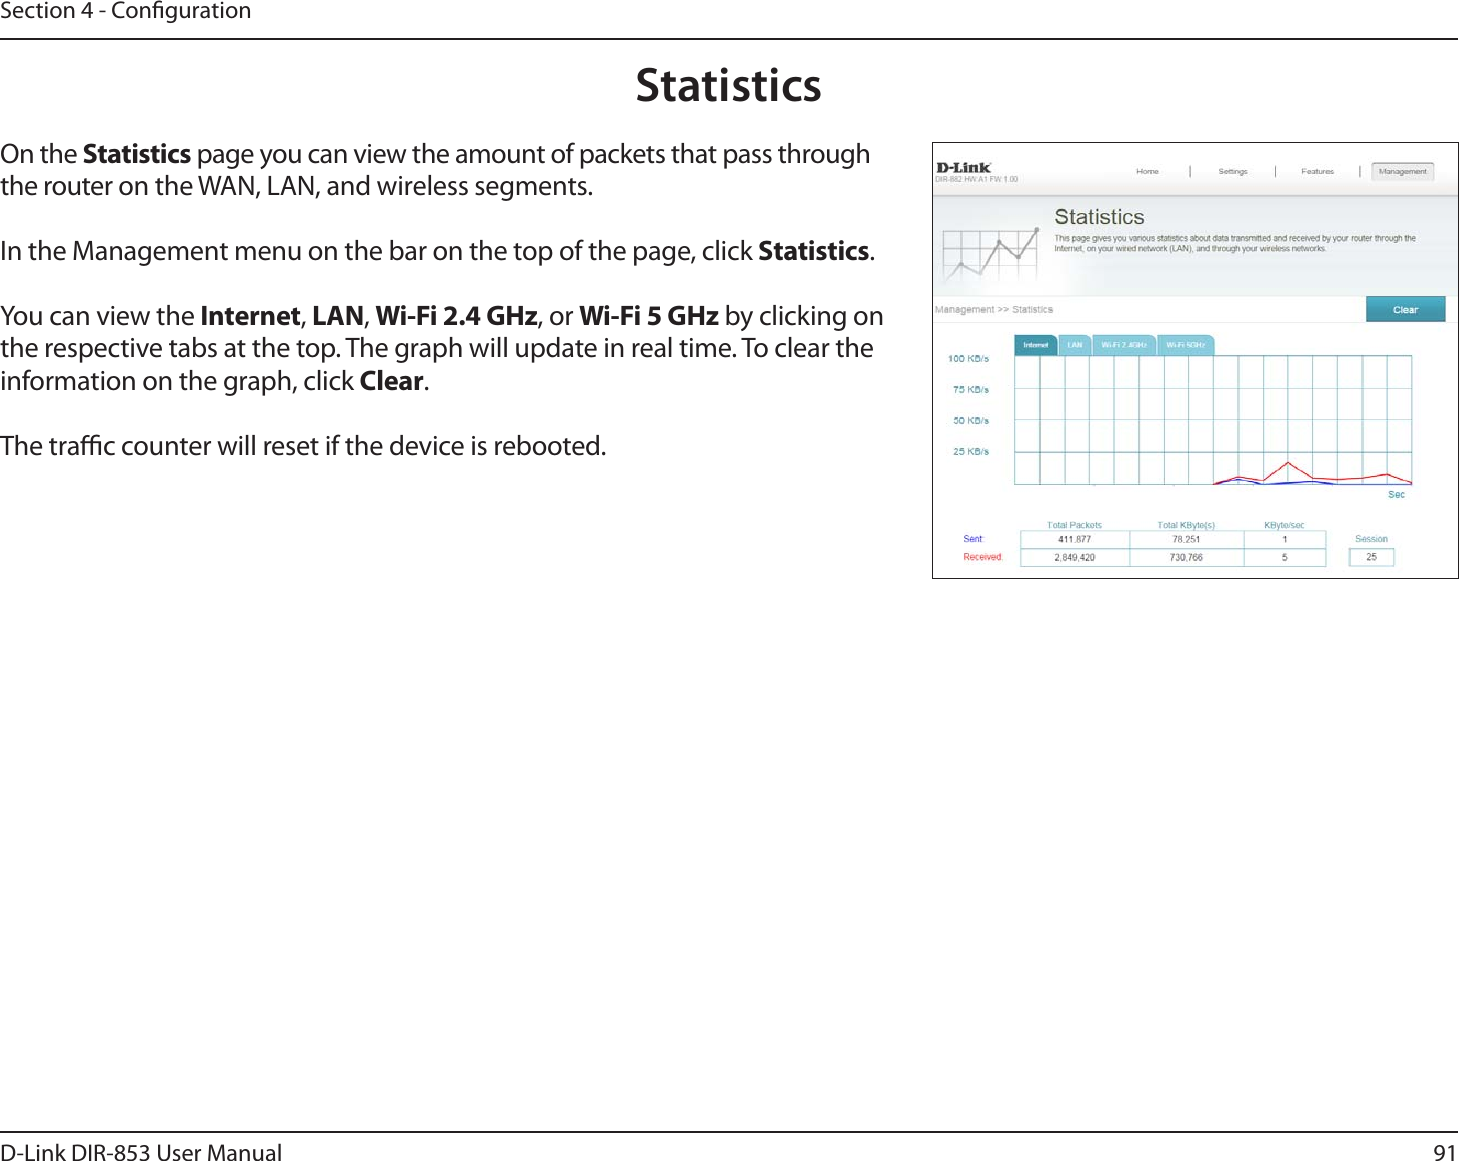 91D-Link DIR-853 User ManualSection 4 - CongurationStatisticsOn the Statistics page you can view the amount of packets that pass through the router on the WAN, LAN, and wireless segments.In the Management menu on the bar on the top of the page, click Statistics.You can view the Internet, LAN, Wi-Fi 2.4 GHz, or Wi-Fi 5 GHz by clicking on the respective tabs at the top. The graph will update in real time. To clear the information on the graph, click Clear.The trac counter will reset if the device is rebooted.